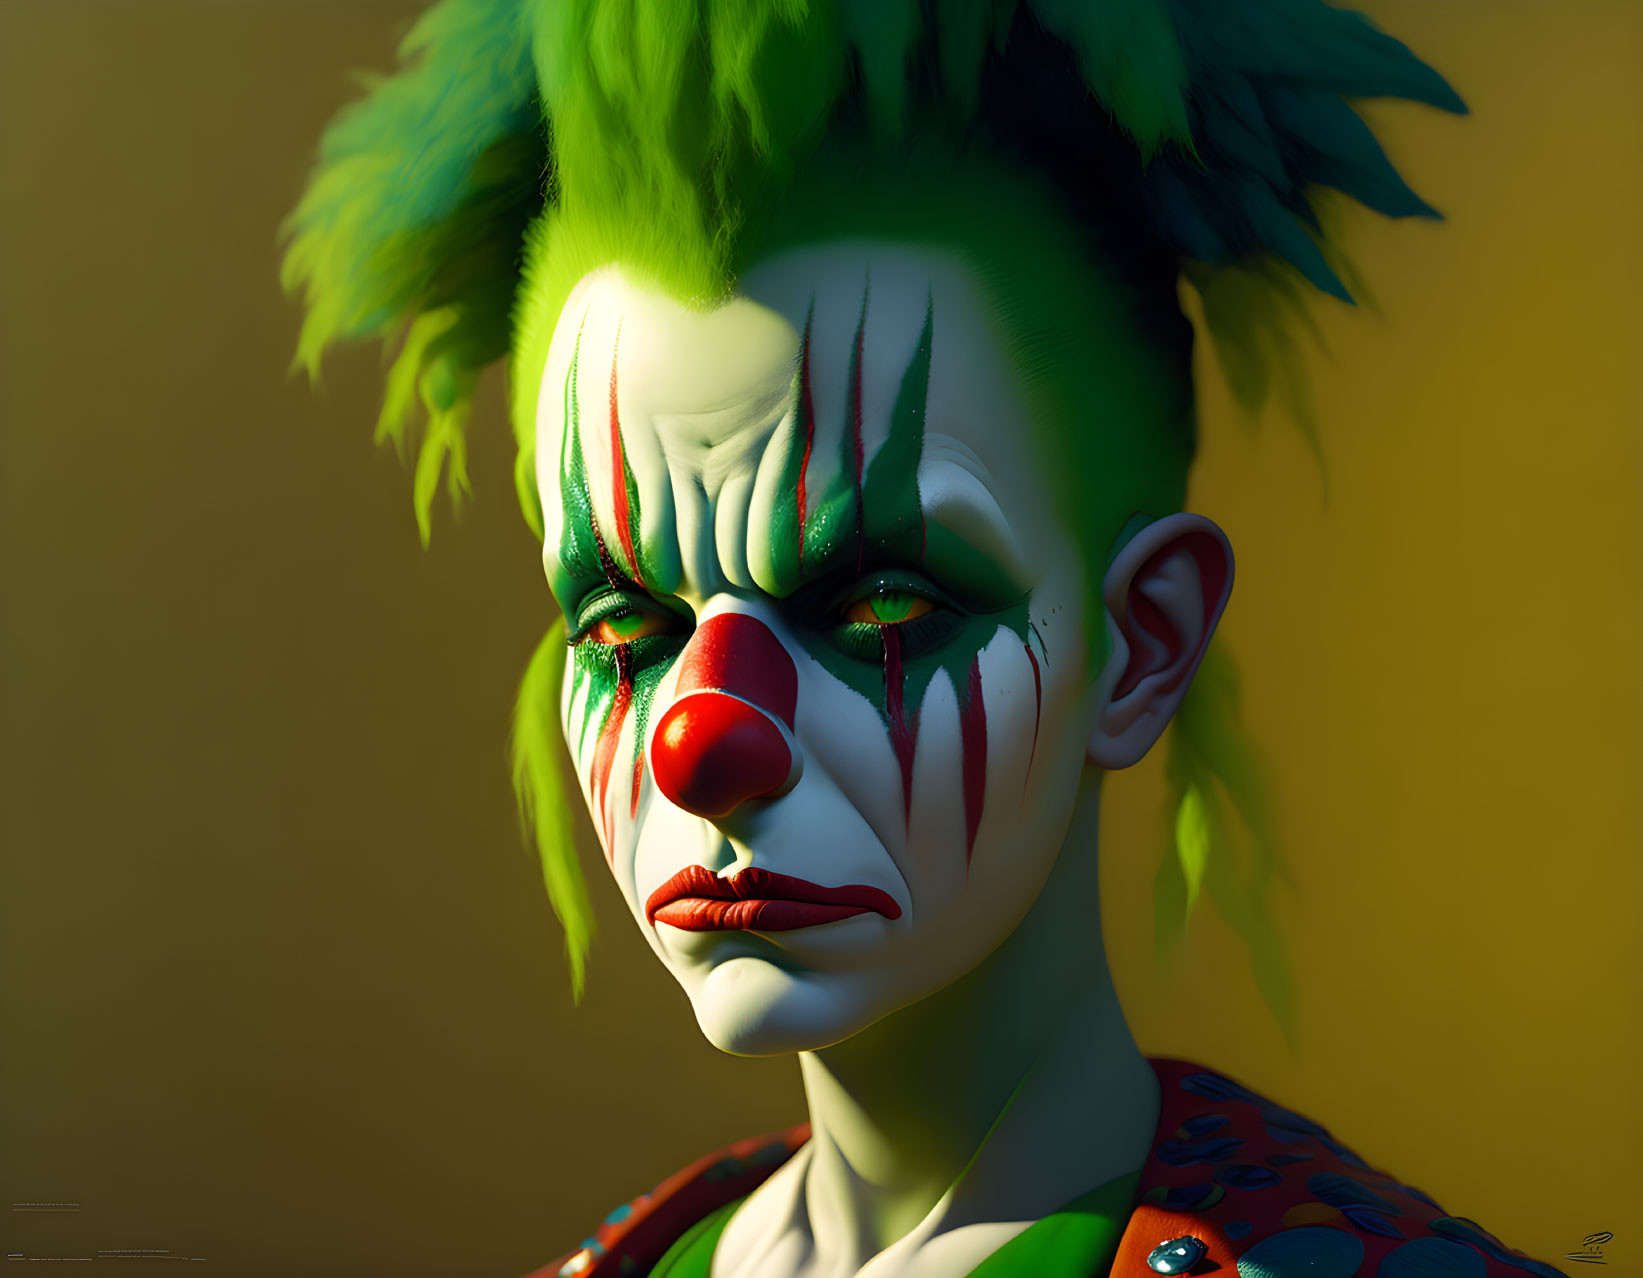 Melancholic clown with green hair and red nose on golden background